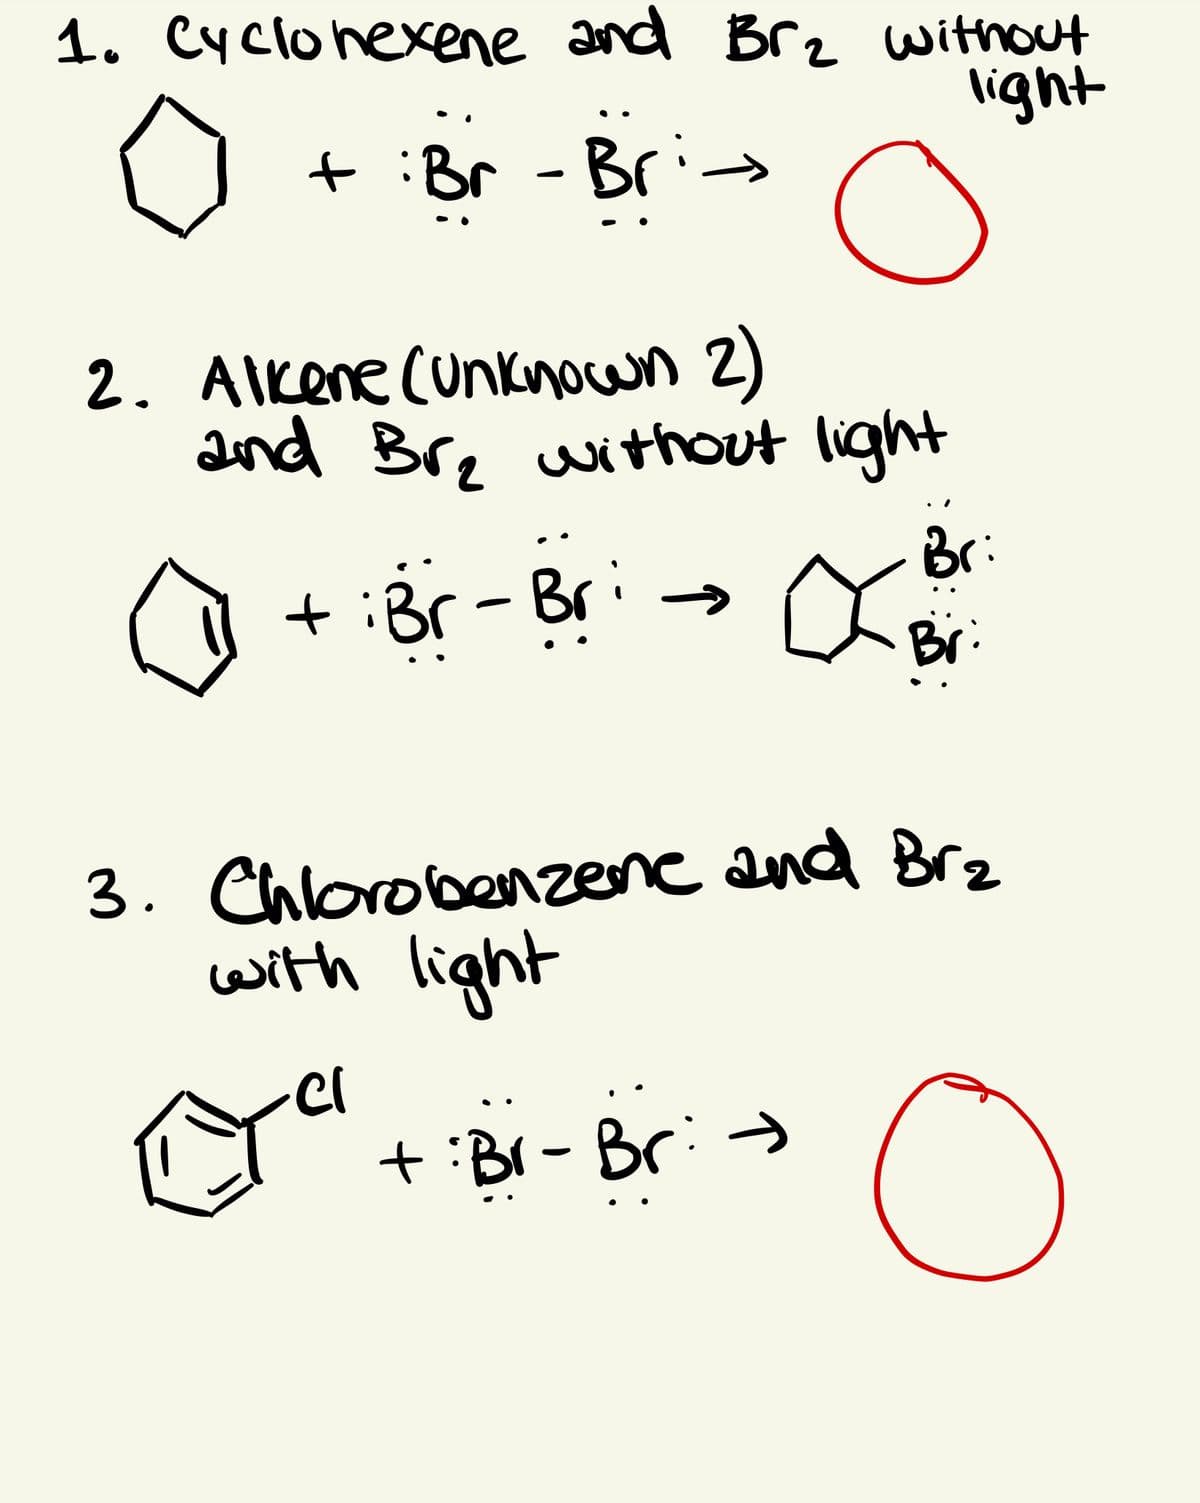 1. Cyclohexene and Brz without
light
:Br - Bri-
2. AIkene (unknocwn 2)
and Bre without light
Br:
+ :Br- Bri-→
Br
3. Chlorobenzene and Brz
with light
